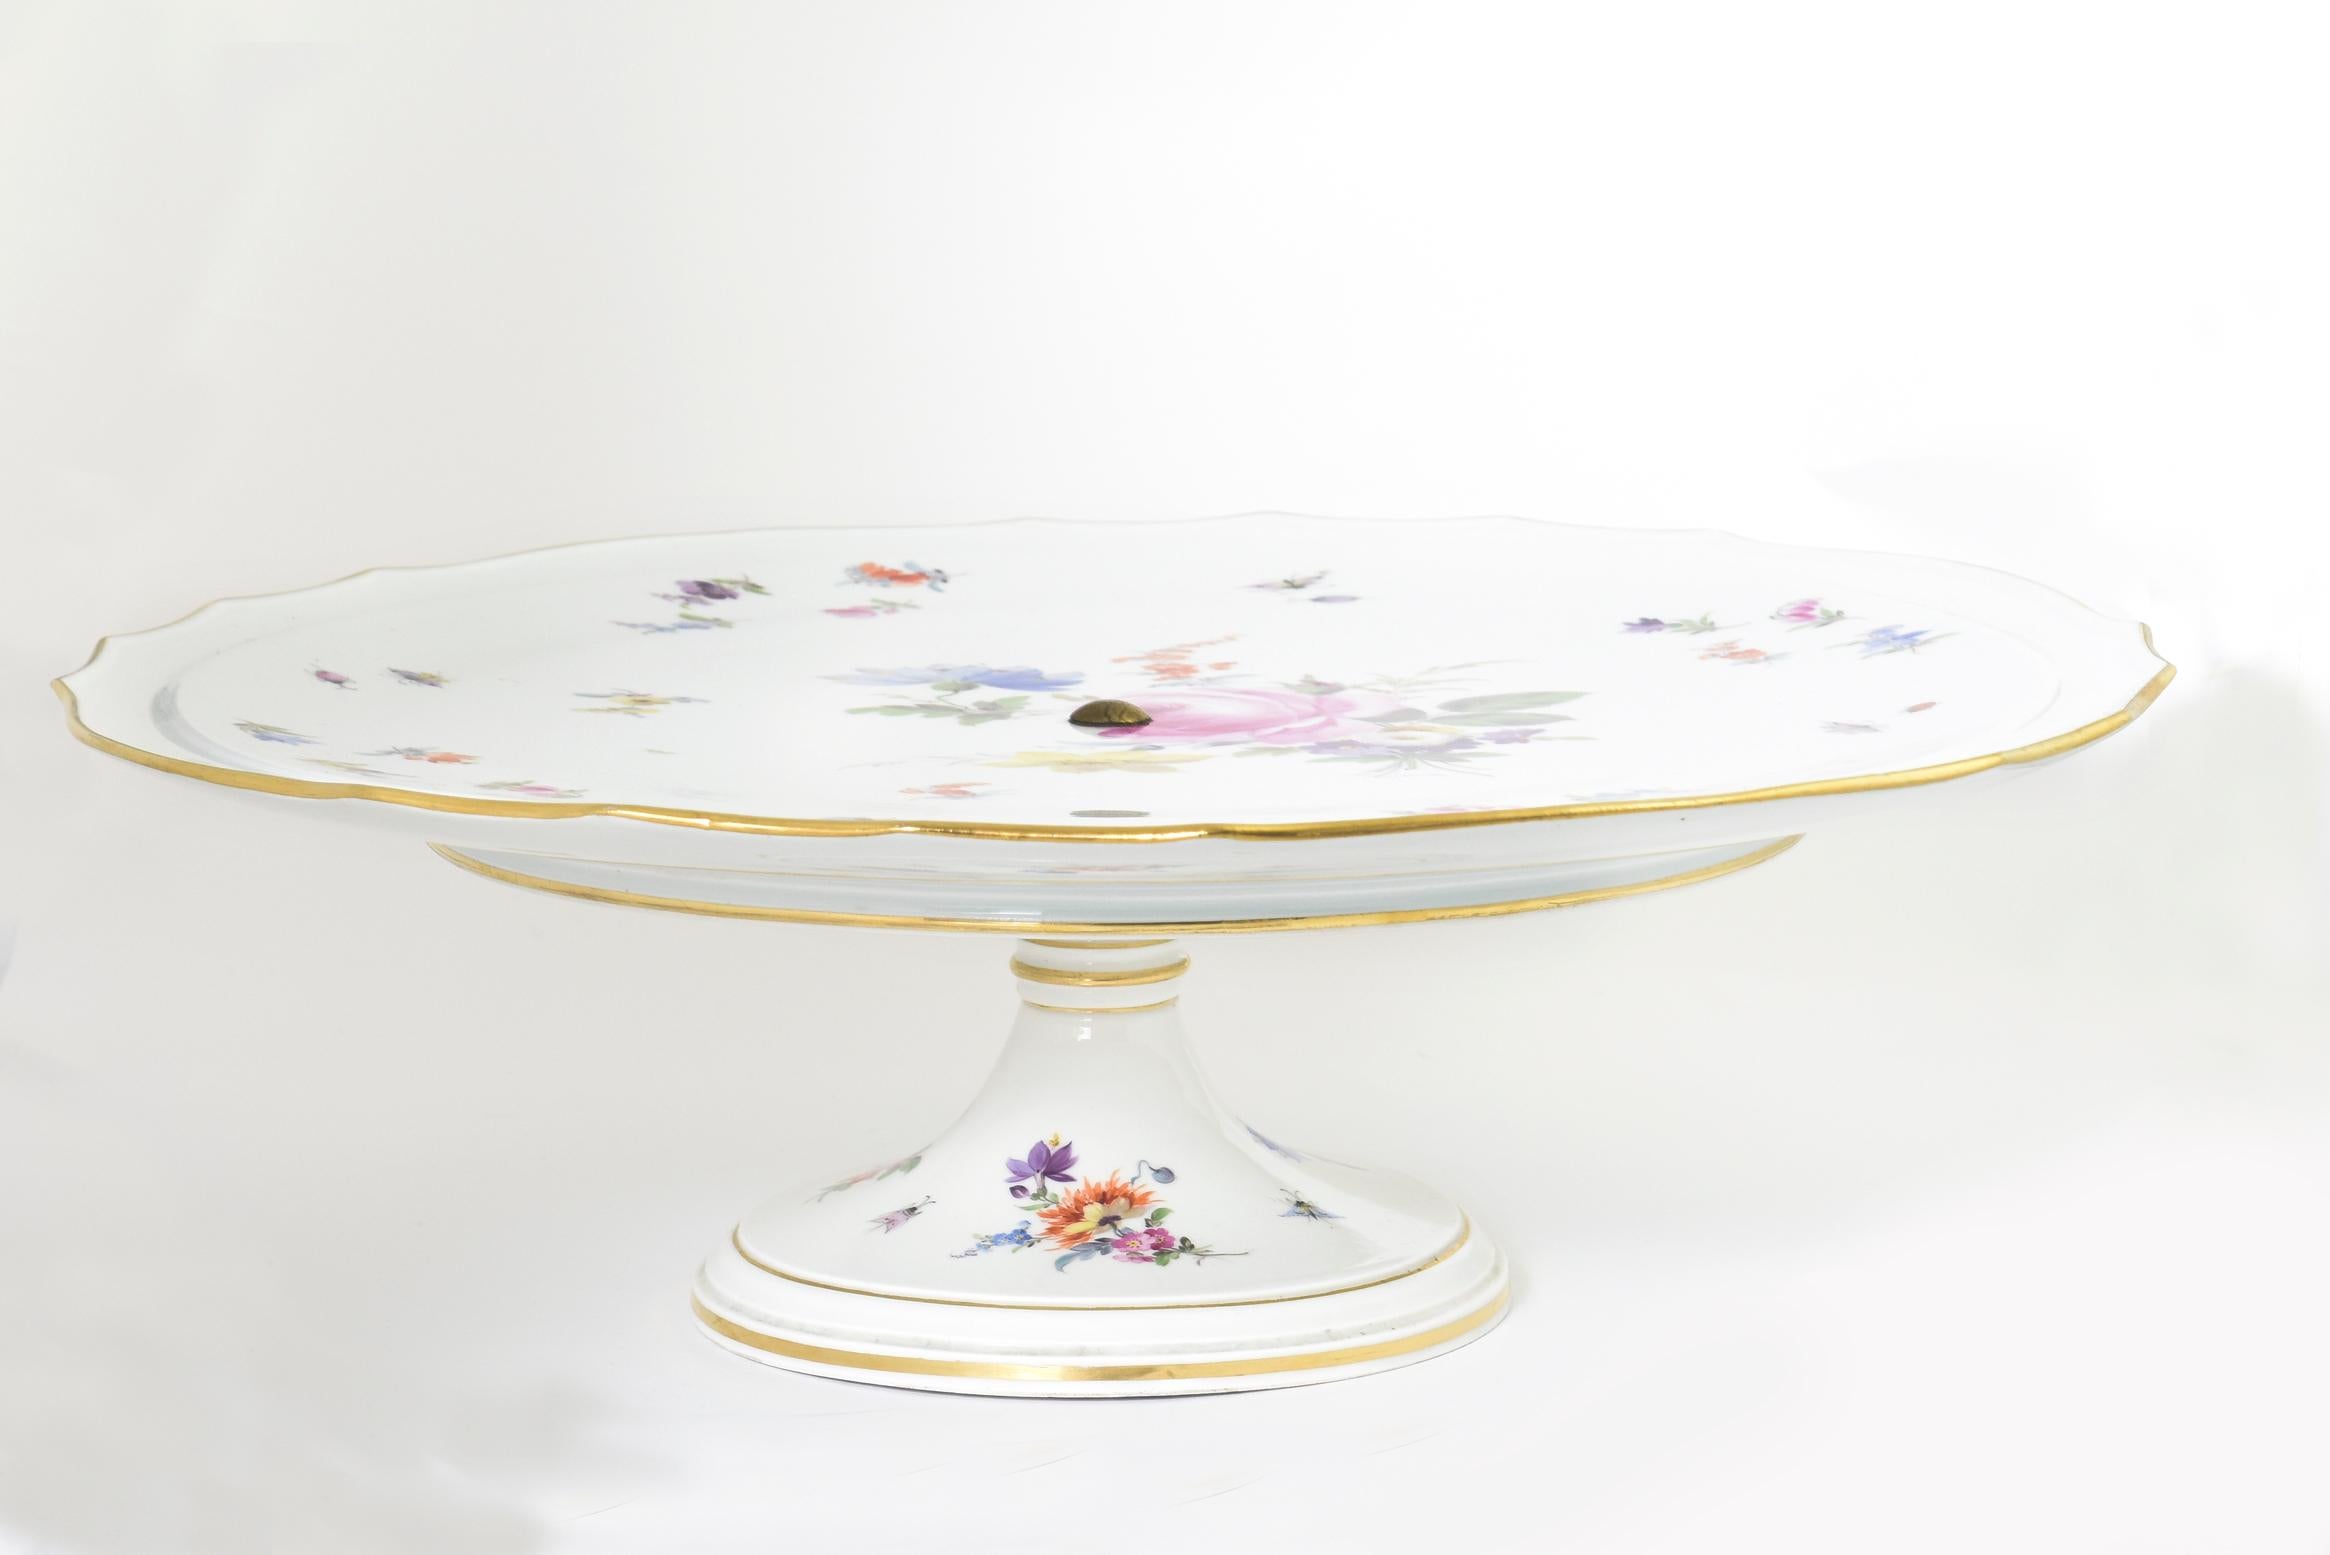 A Meissen cake Stand with a gilt scalloped rim decorated with hand painted scattered flowers, bugs, and butterflies. Cross swords in blue under glaze, impressed,
circa first half of the 20th century.